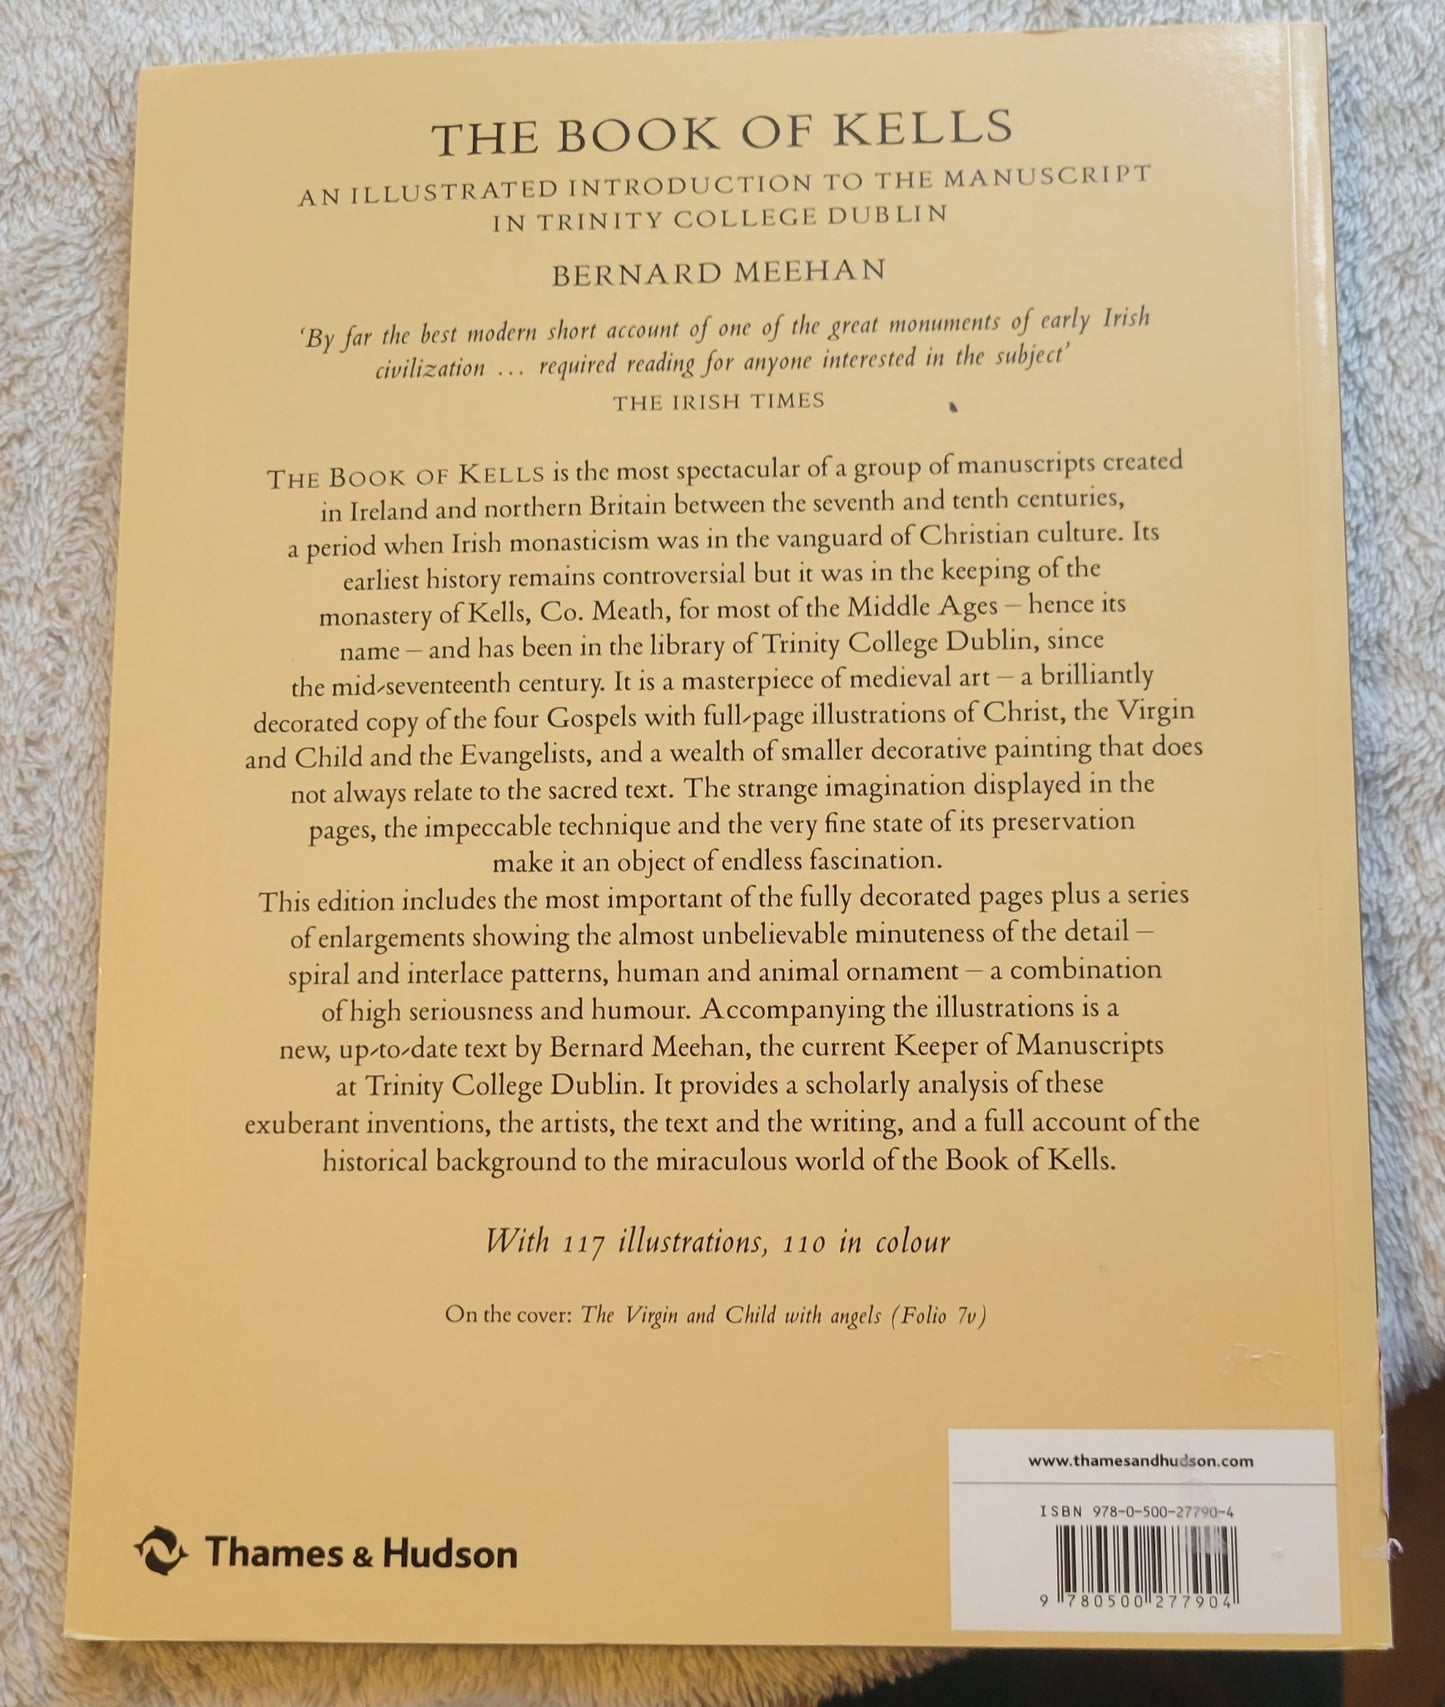  Used book for sale "The Book of Kells: An Illustrated Introduction to the Manuscript in Trinity College Dublin" by Bernard Meehan, published by Thames & Hudson, Ltd, copyright 1994, reprint in 2013. Back cover.